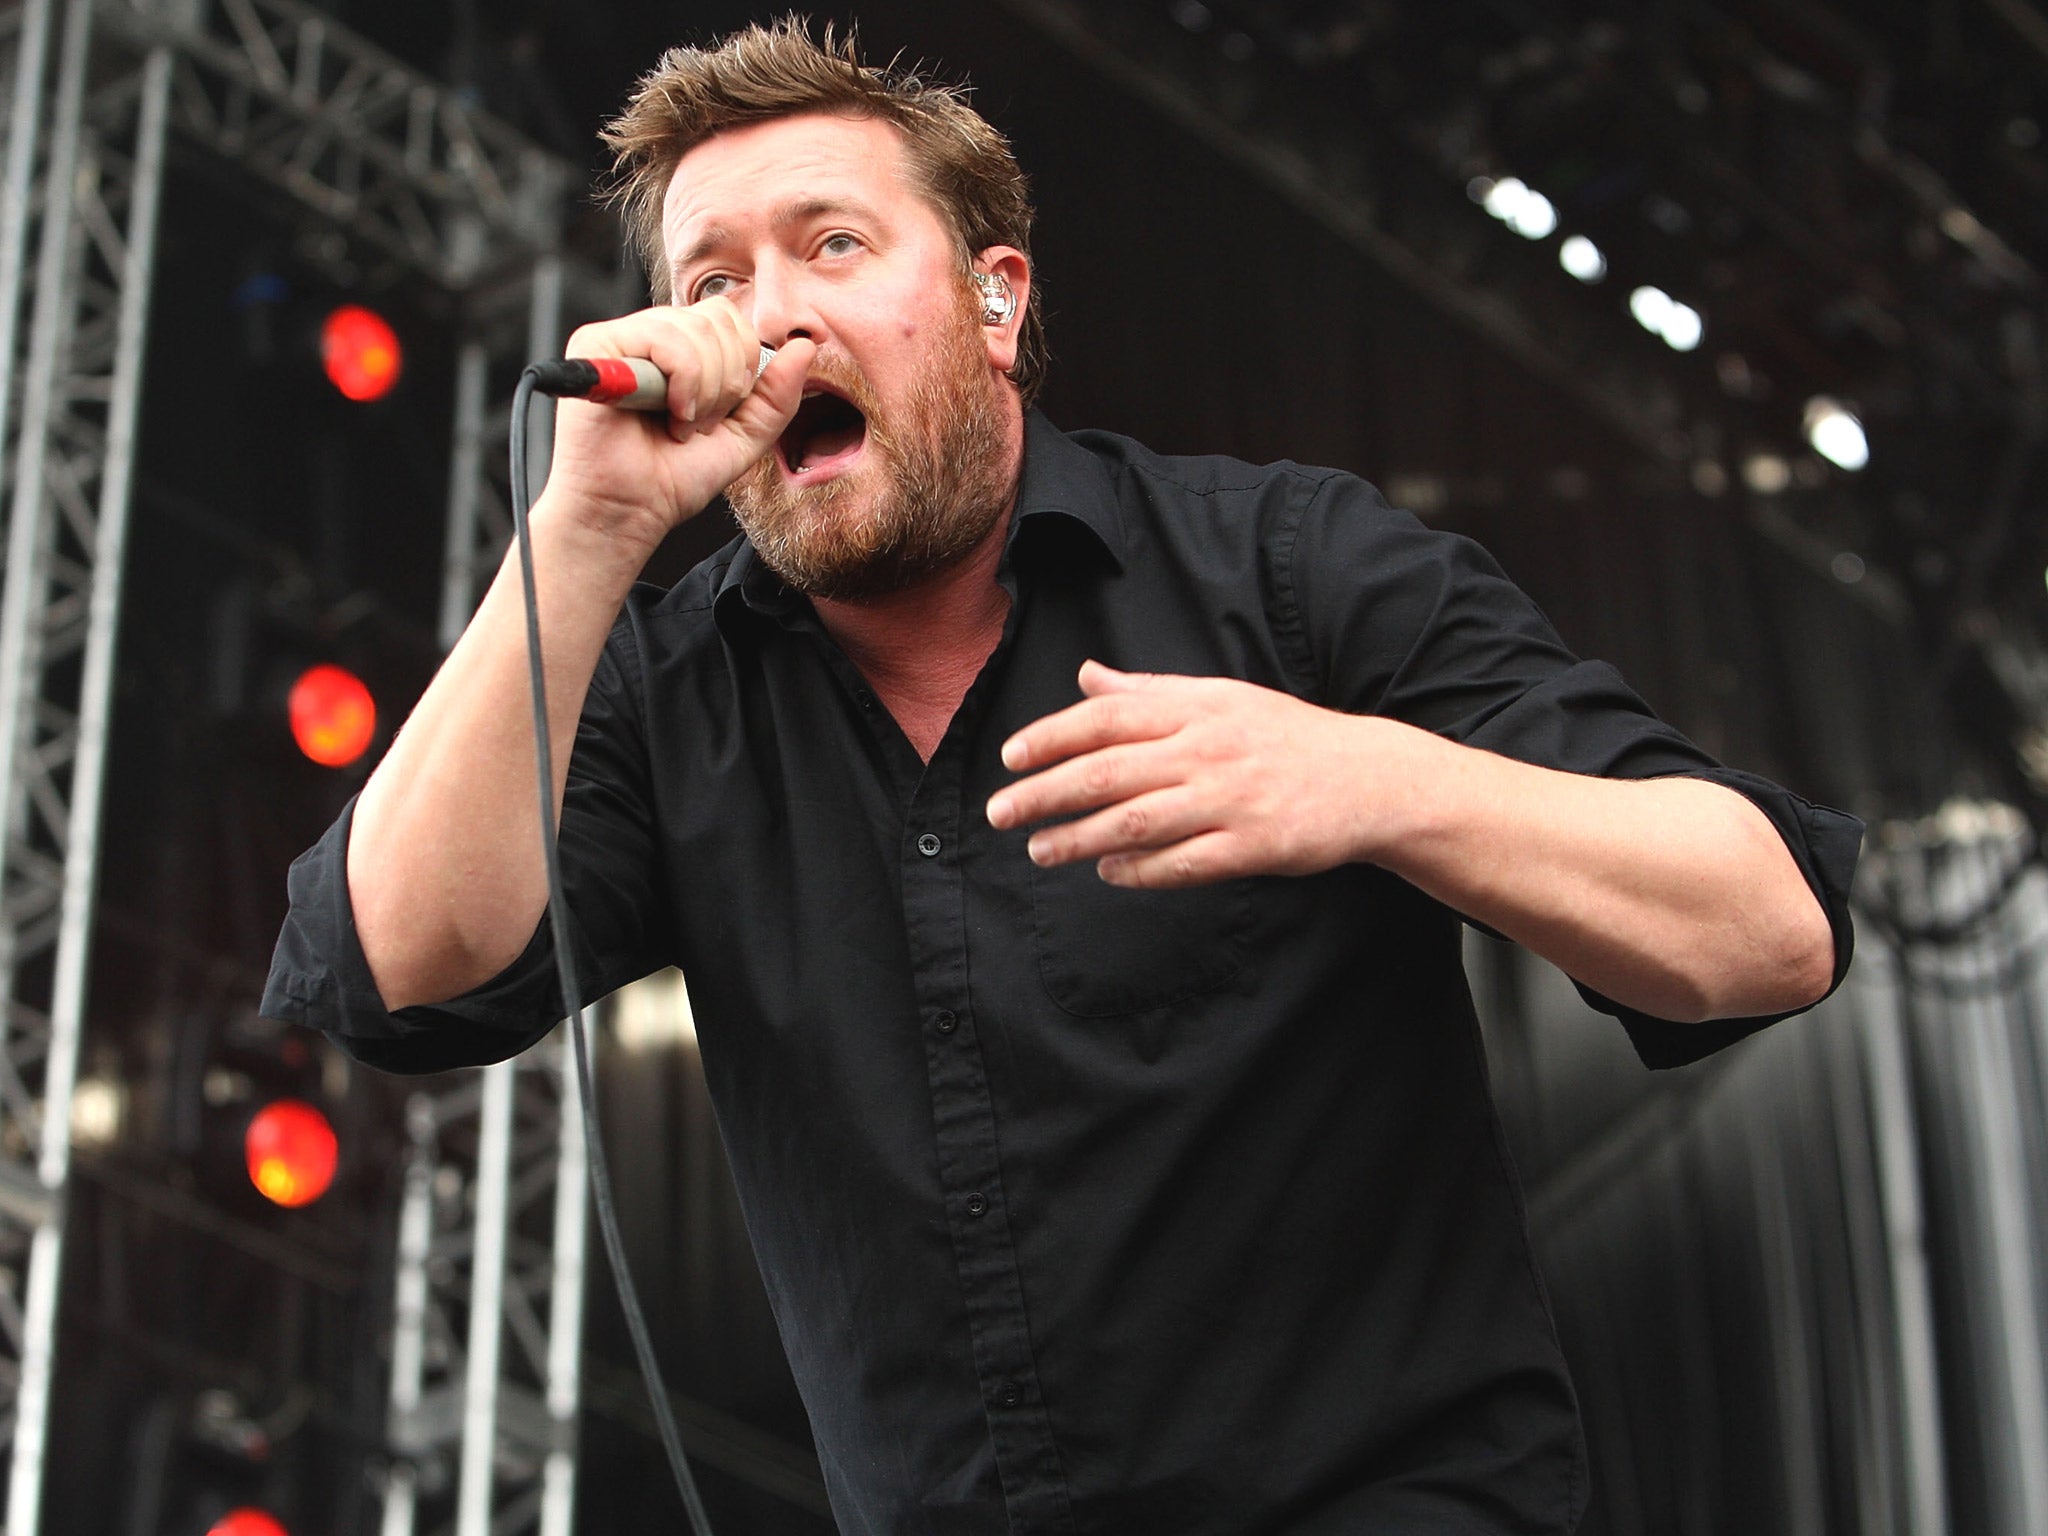 Elbow frontman Guy Garvey has successfully translated his warmth from the stage to the radio studio